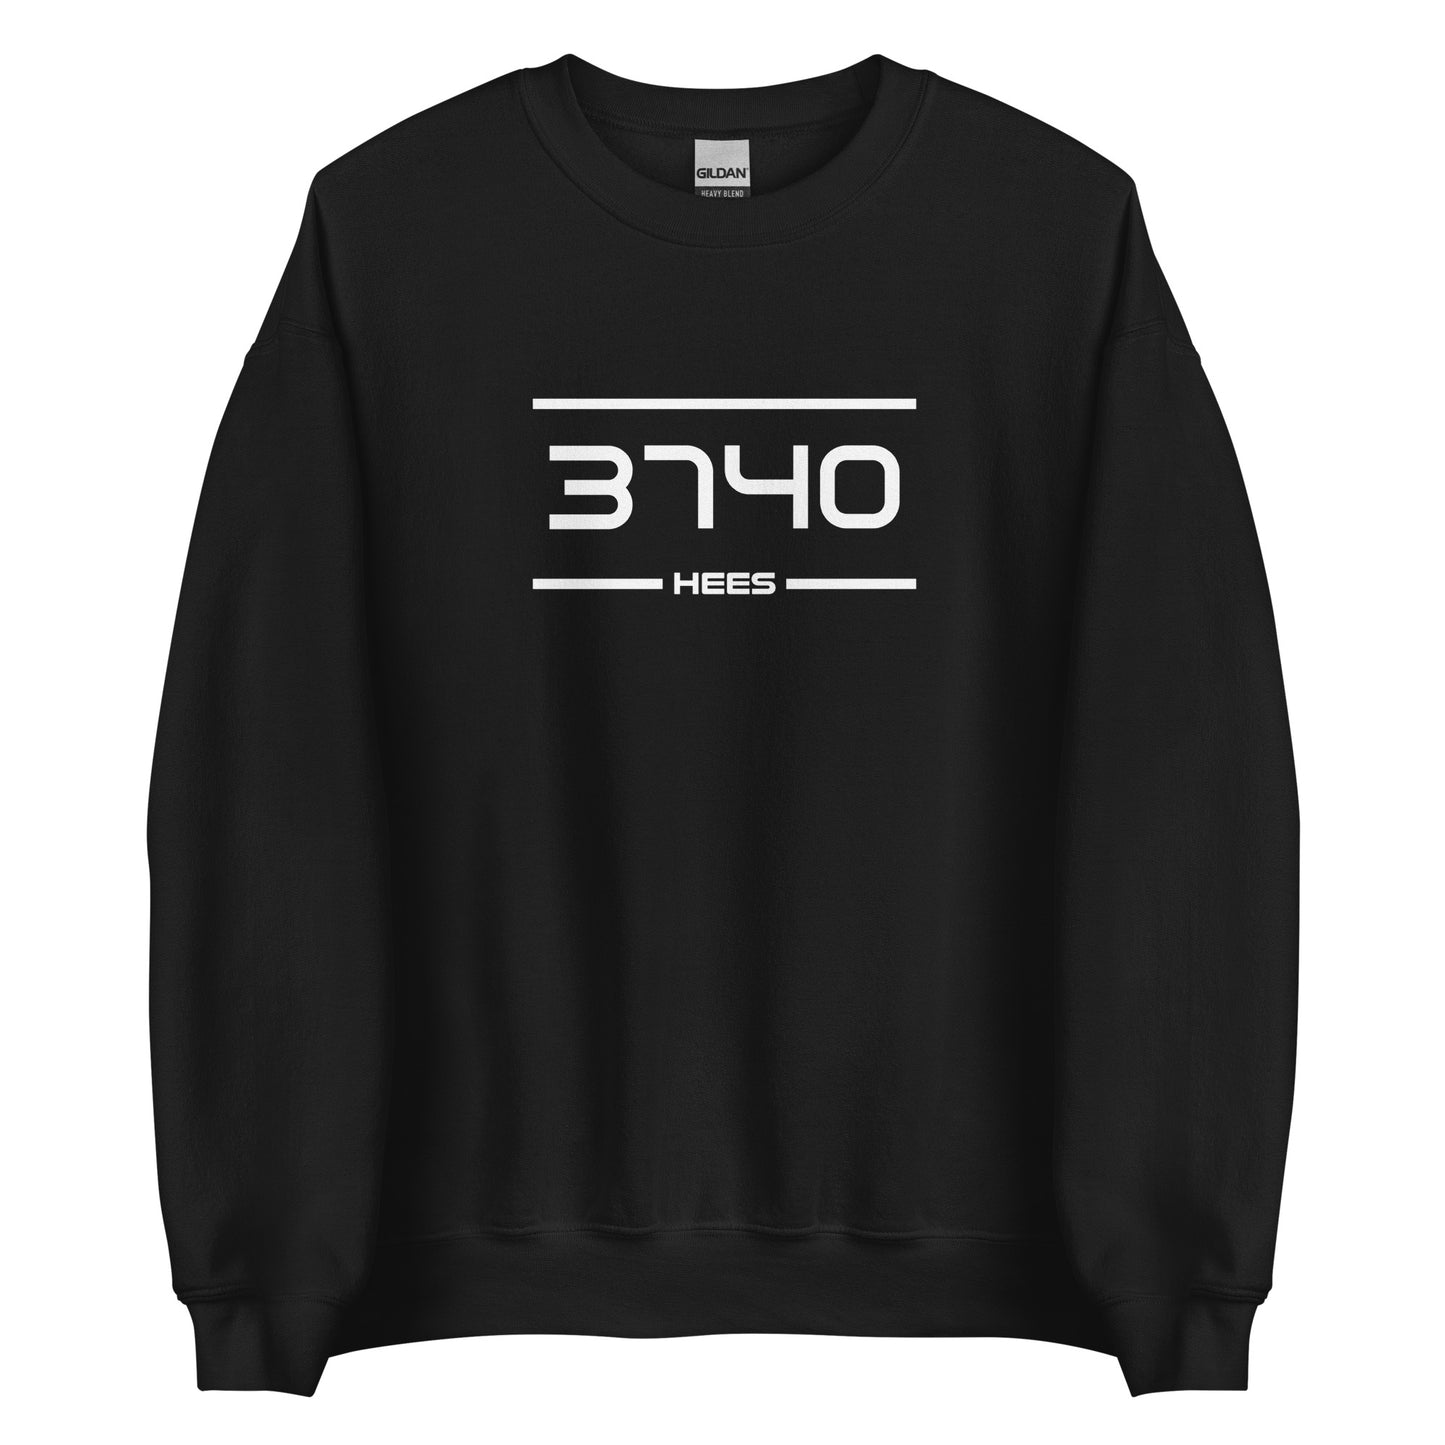 Sweater - 3740 - Hees (M/V)